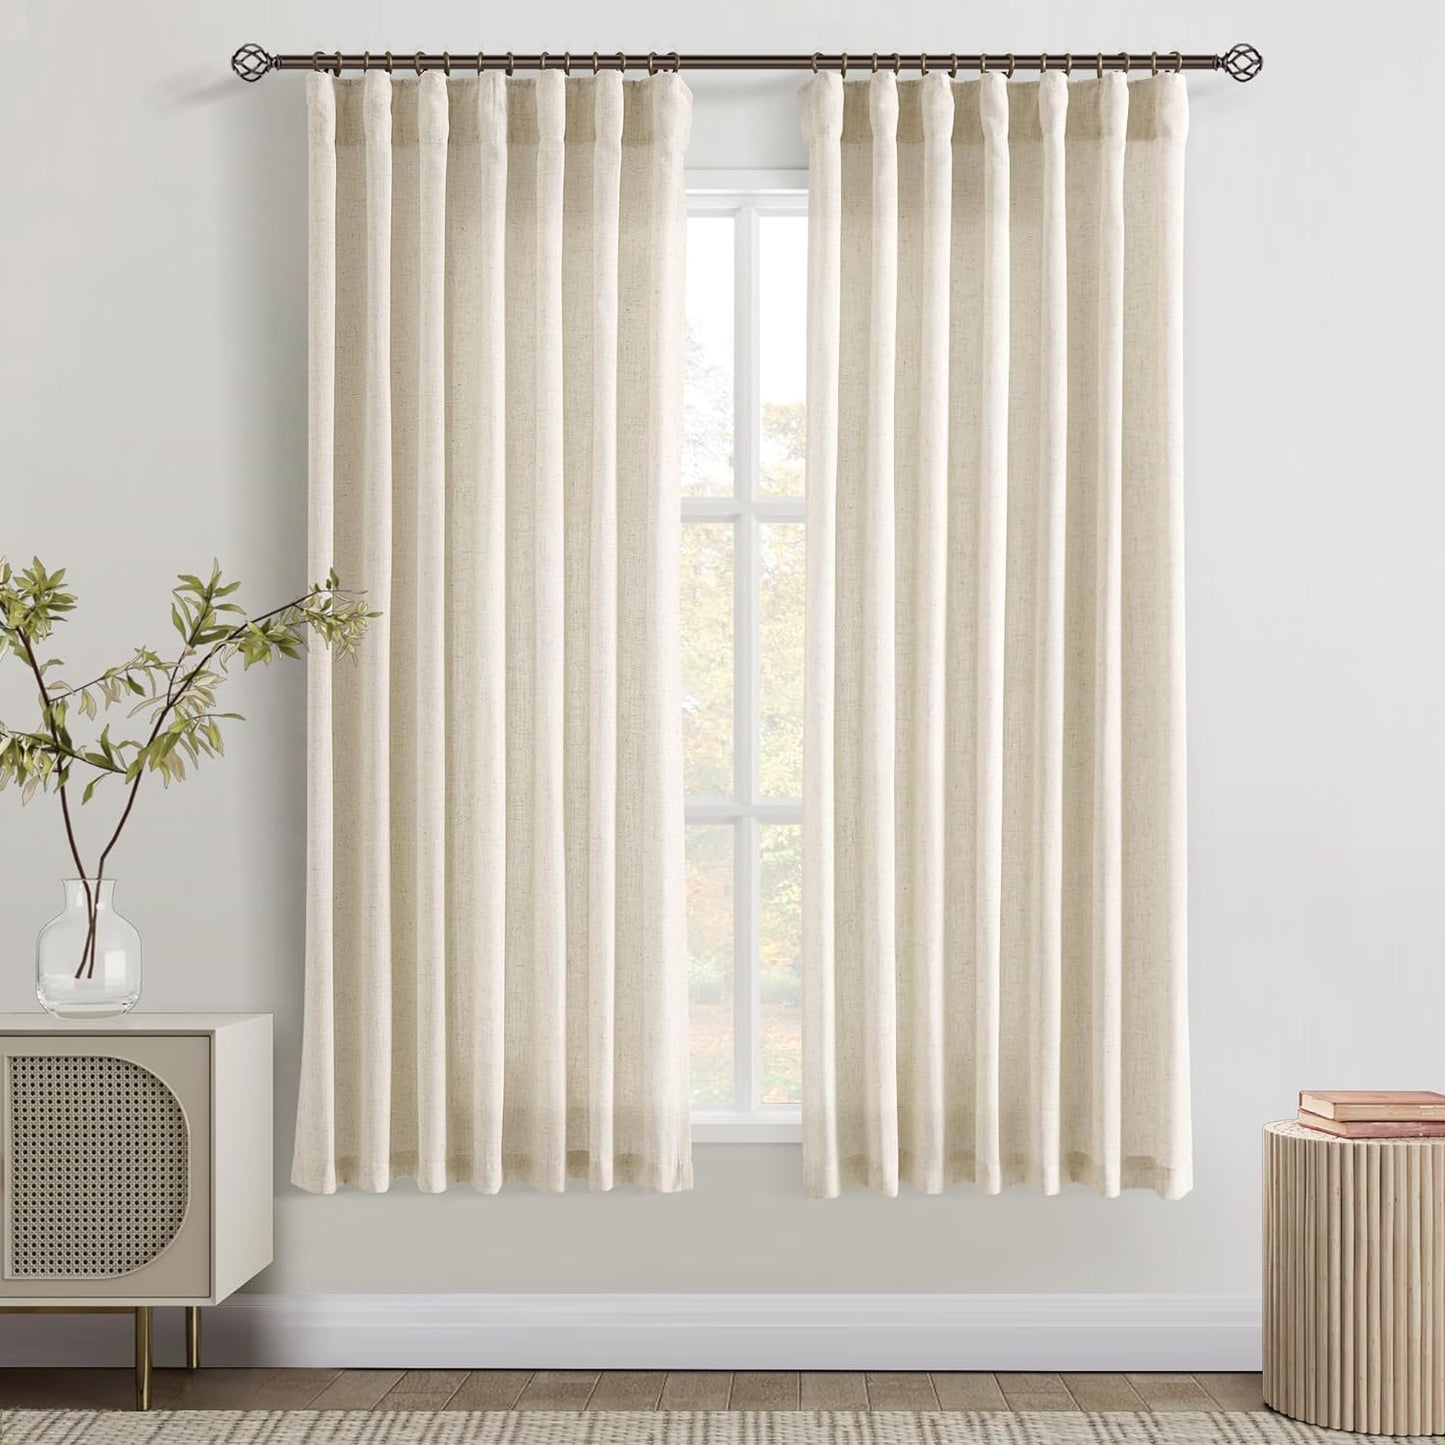 Joywell Natural Linen Cream Curtains 84 Inches Long for Living Room Bedroom Hook Belt Back Tab Pinch Pleated Light Filtering Ivory White Neutral Boho Modern Farmhouse Linen Drapes 84 Length 2 Panels  Joywell Sand Beige 52W X 63L Inch X 2 Panels 